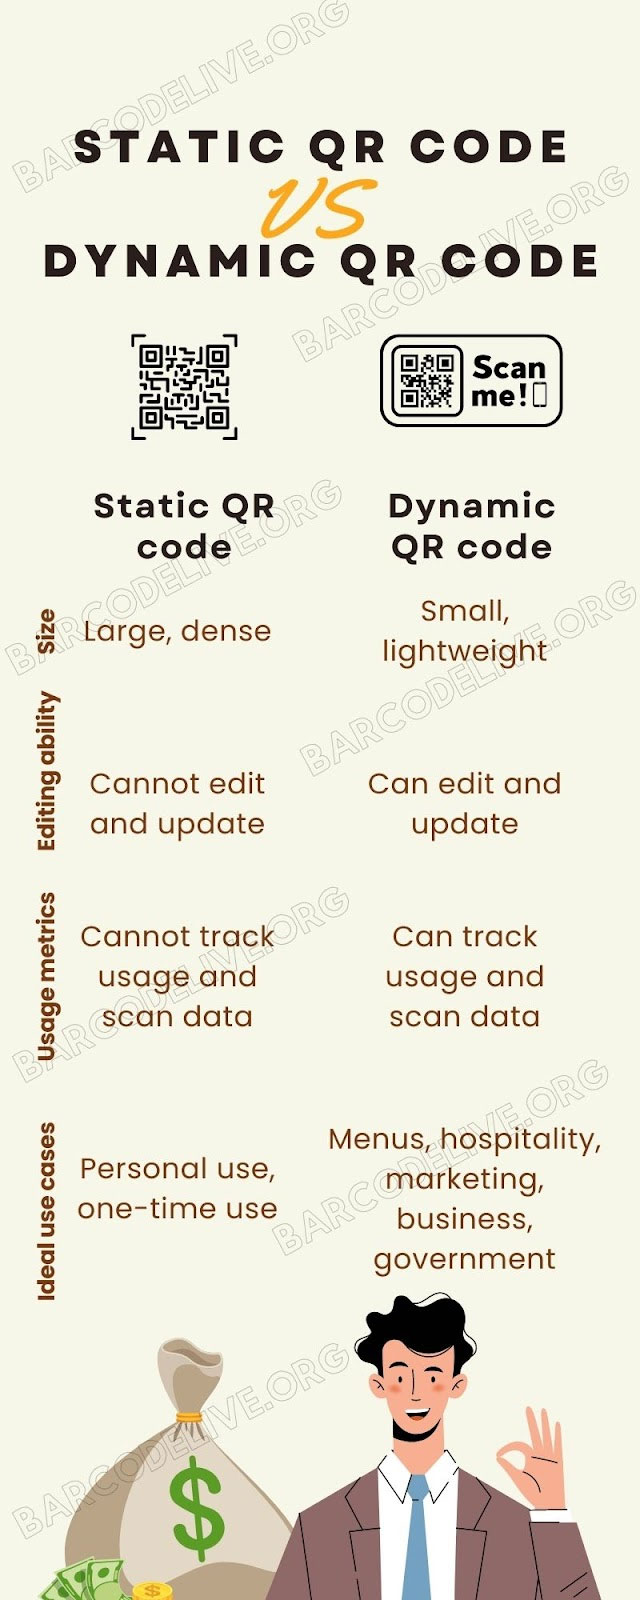 Comparison basic features of static and dynamic QR code